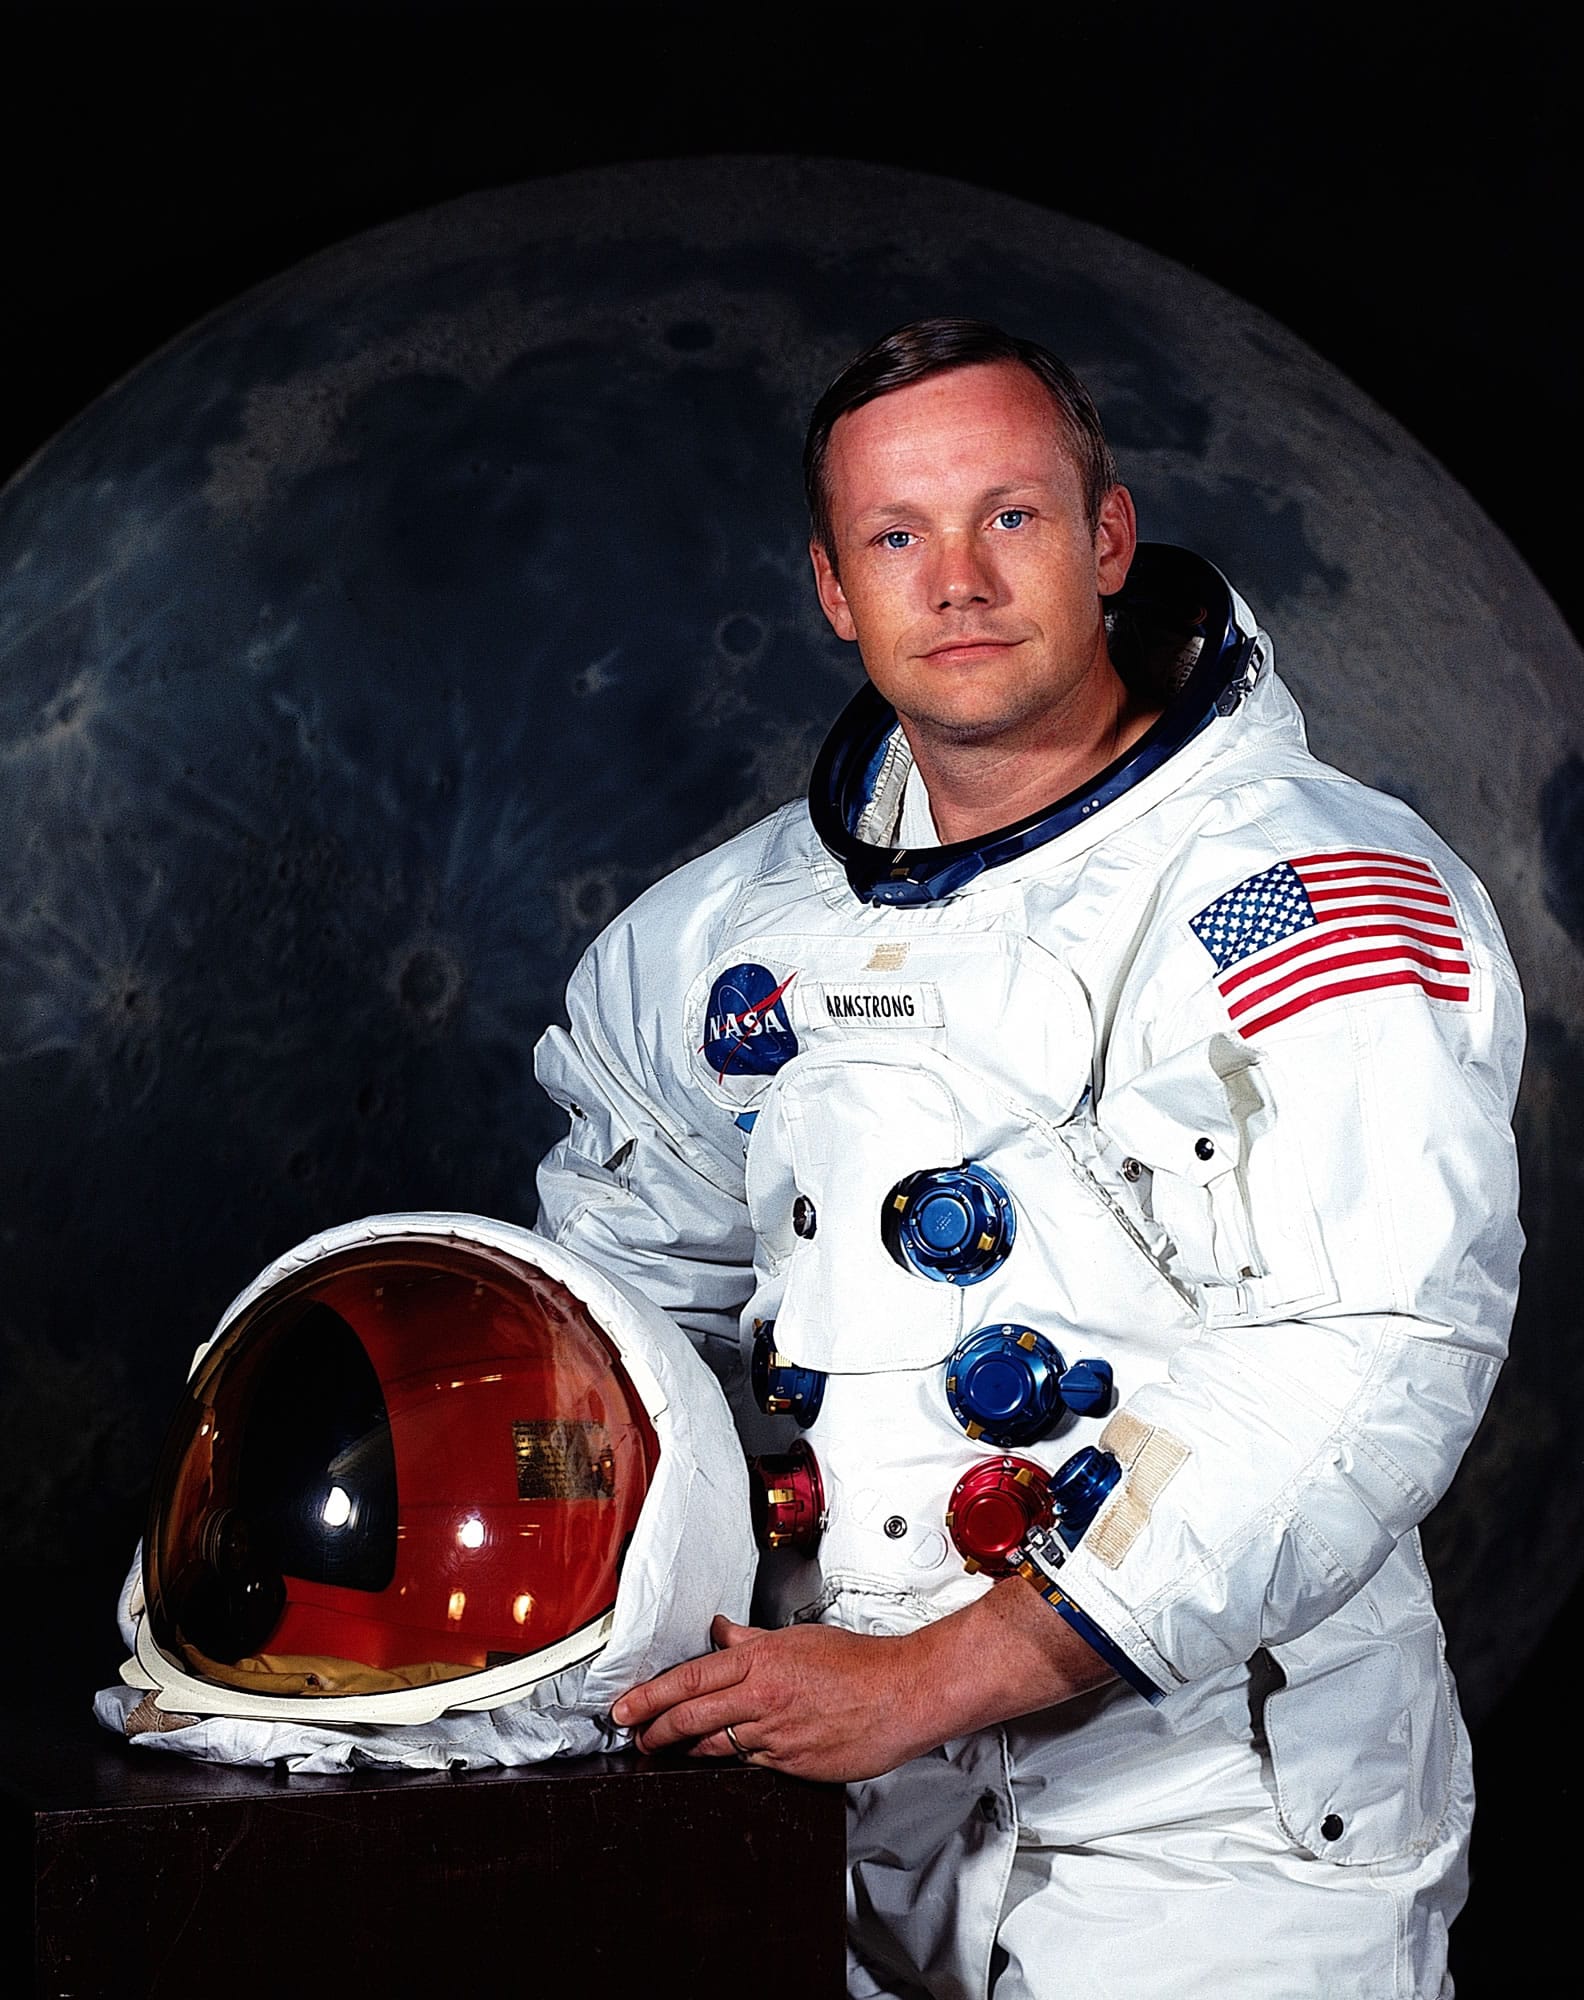 NASA
Astronaut Neil Armstrong, the first man to walk on the moon, died Aug. 25 at age 82. Armstrong commanded the Apollo 11 spacecraft that landed on the moon July 20, 1969. He radioed back to Earth the historic news of &quot;one giant leap for mankind.&quot;